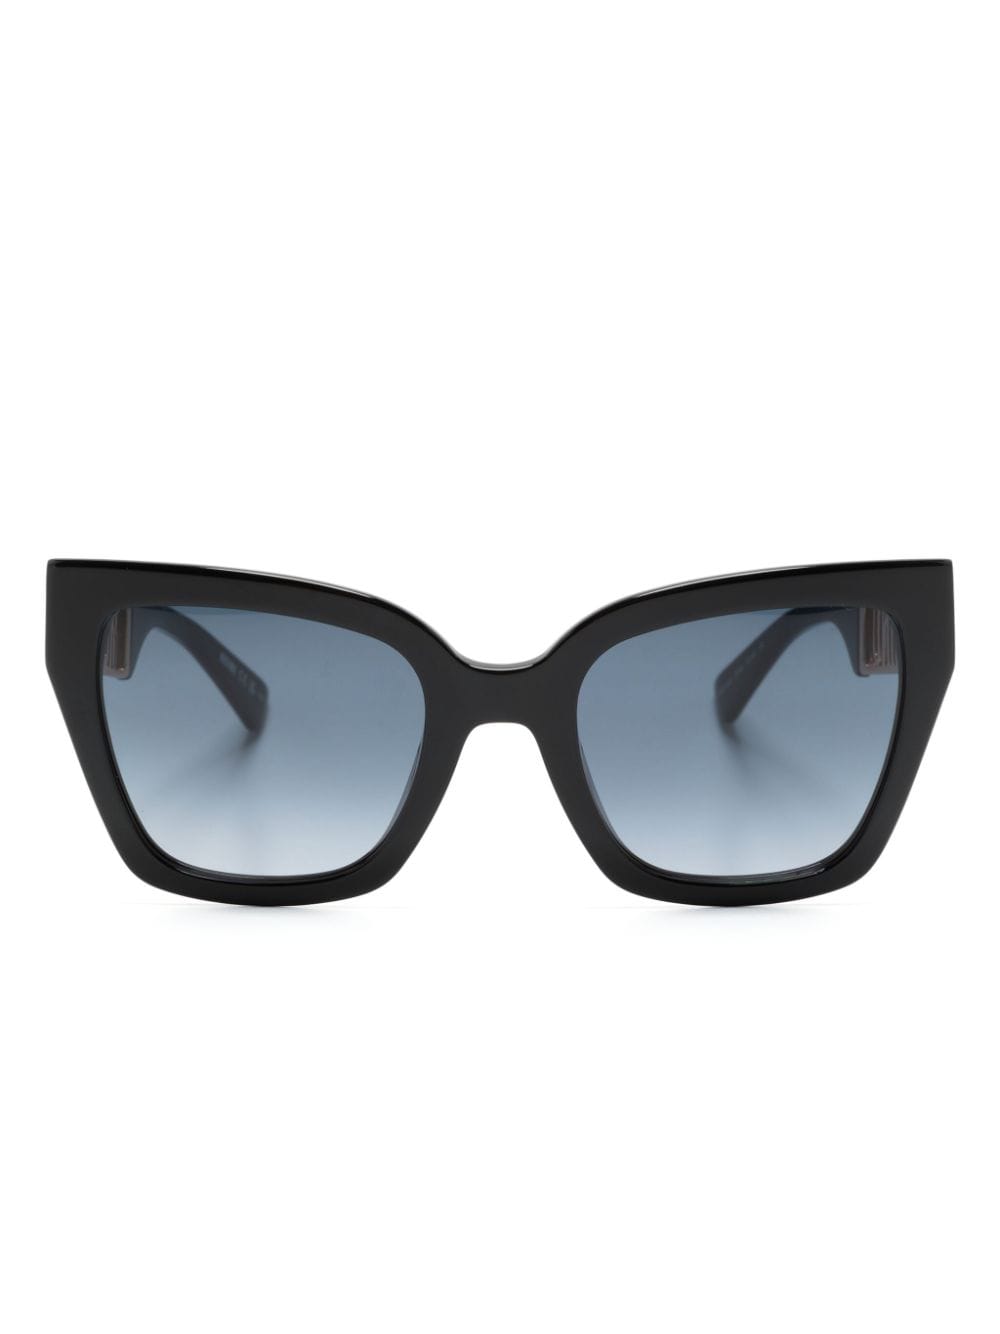 butterfly-frame sunglasses